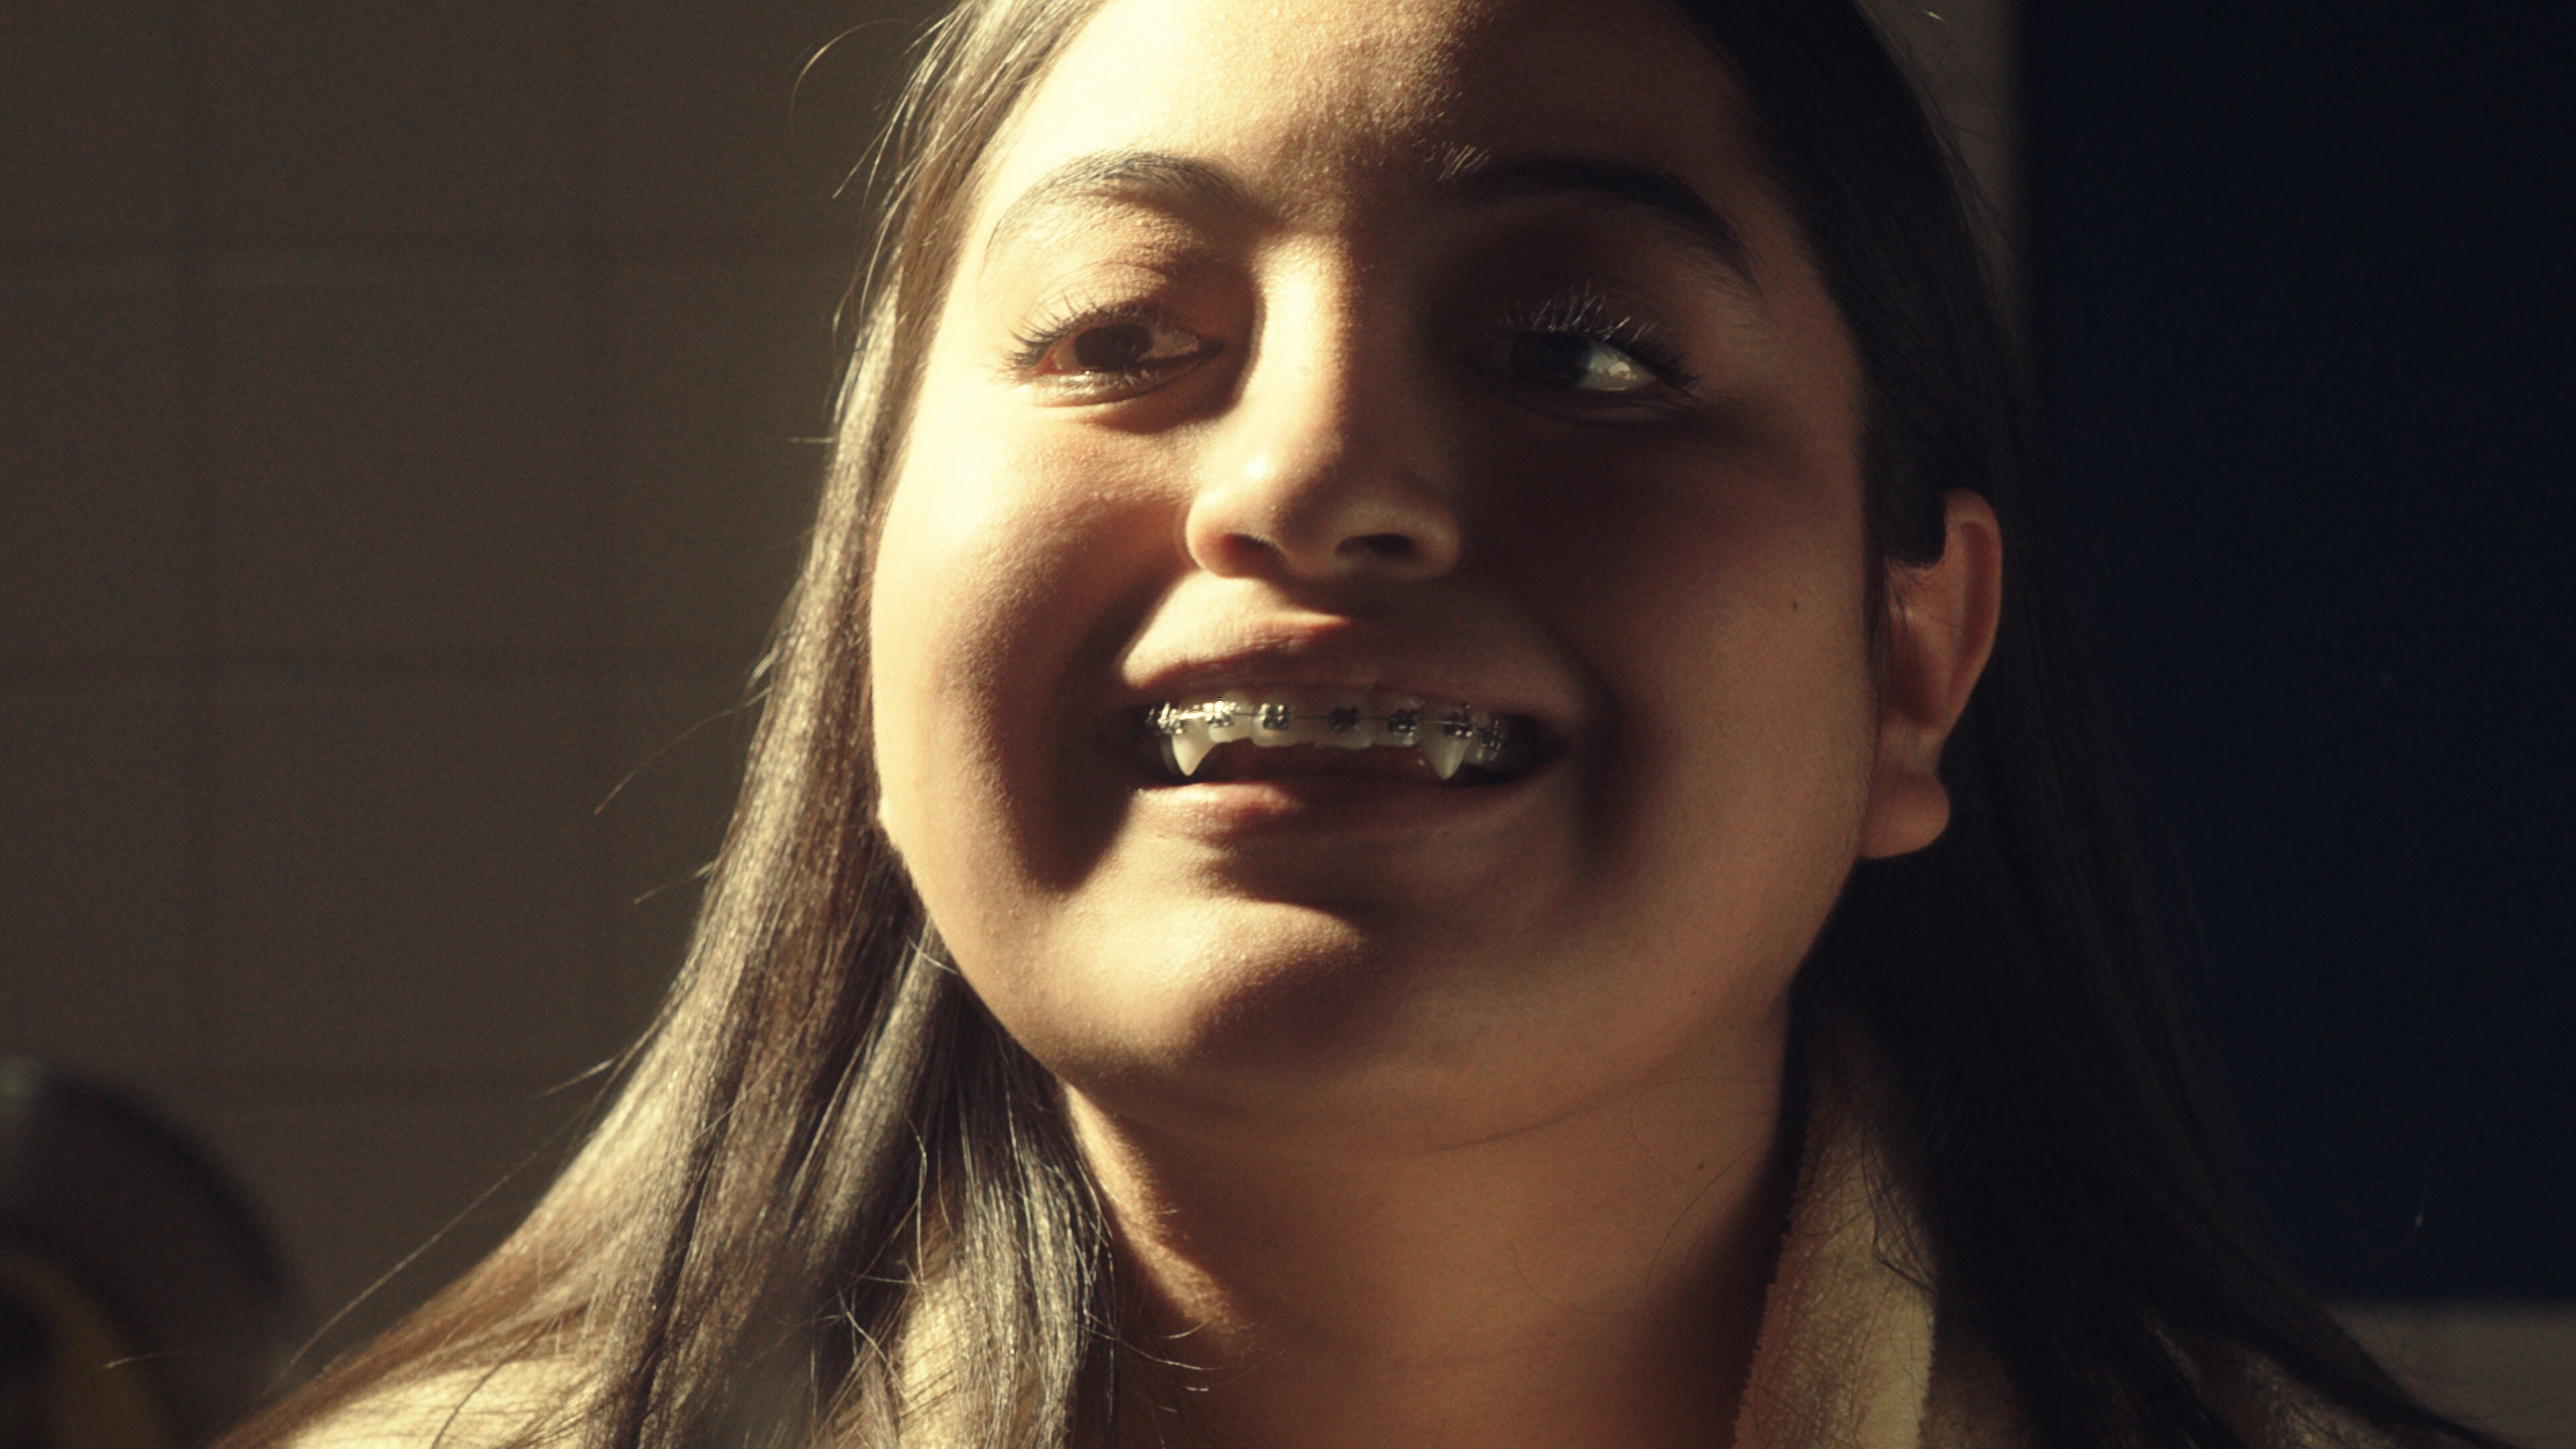 Keyla Monterroso Mejia as Val Garcia in Disney’s “LAUNCHPAD” Season One short, “GROWING FANGS,” Written and Directed by Ann Marie Pace. Photo courtesy of Disney. © 2021 Disney Enterprises, Inc. All Rights Reserved.